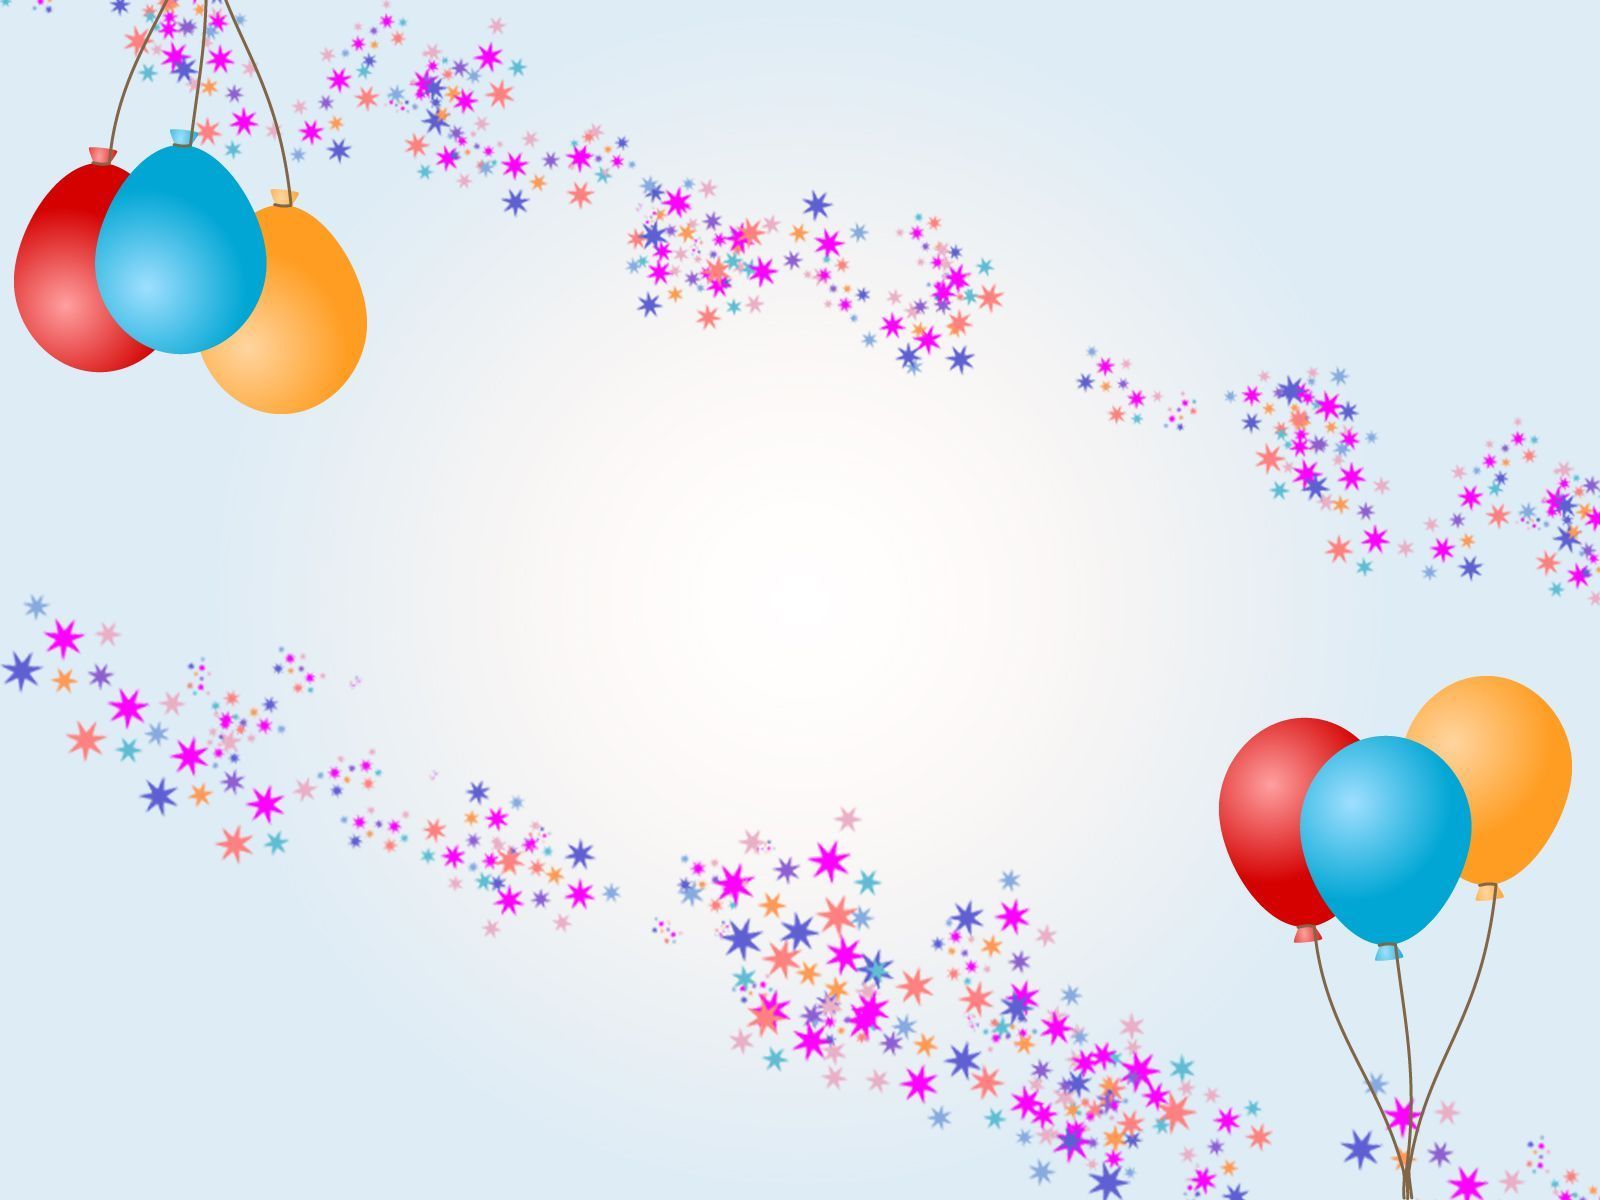 Balloons with Stars for Birthday Backgrounds - Cartoon, Holiday